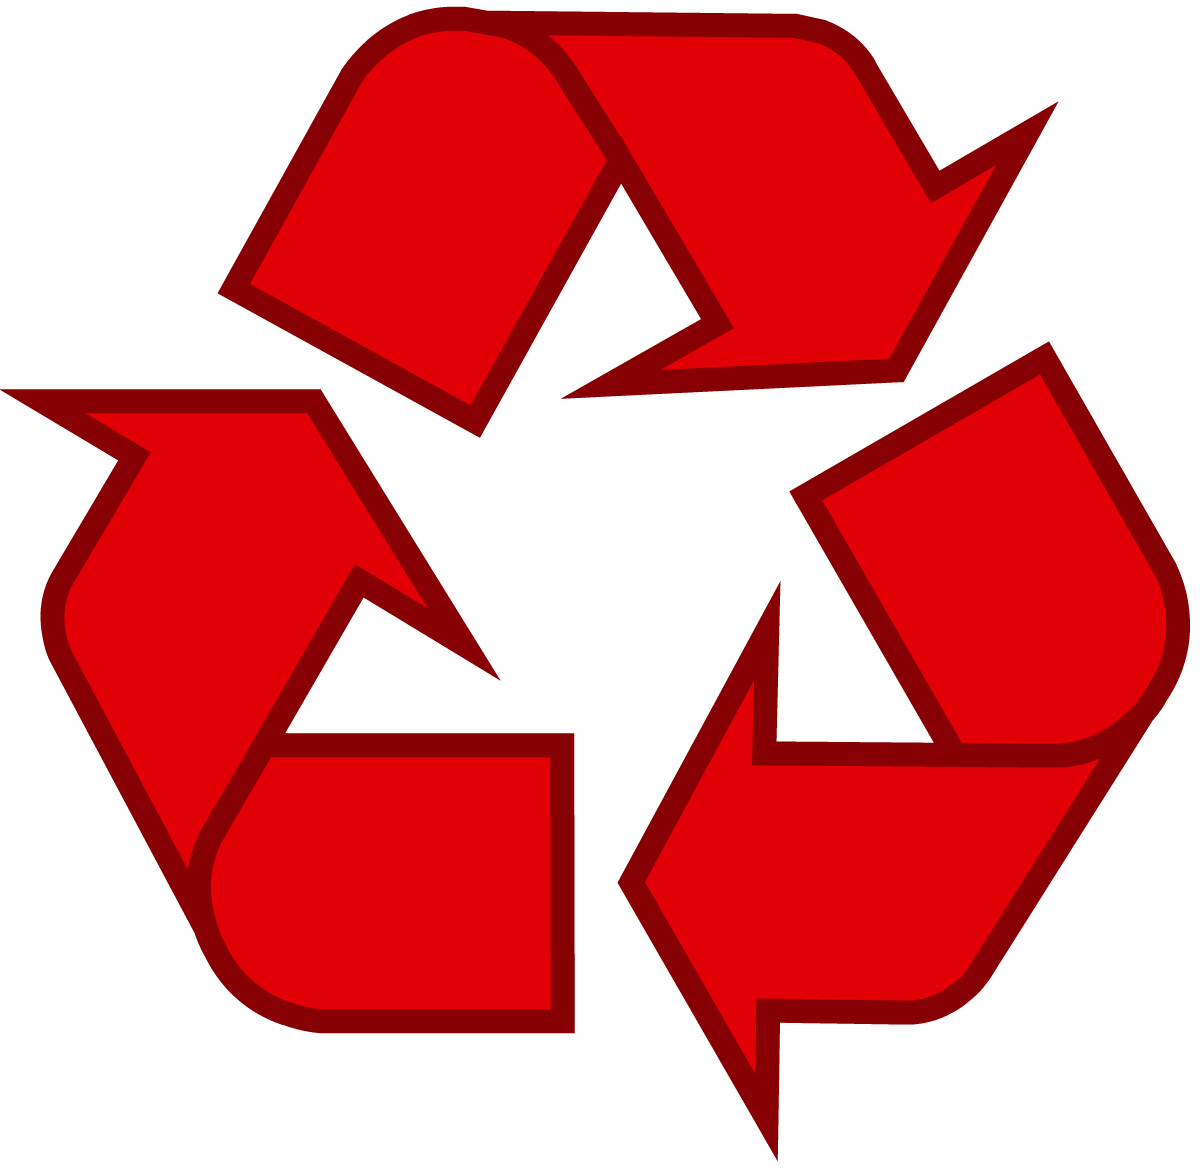 Red Recycle Logo - Recycling Symbol - Download the Original Recycle Logo